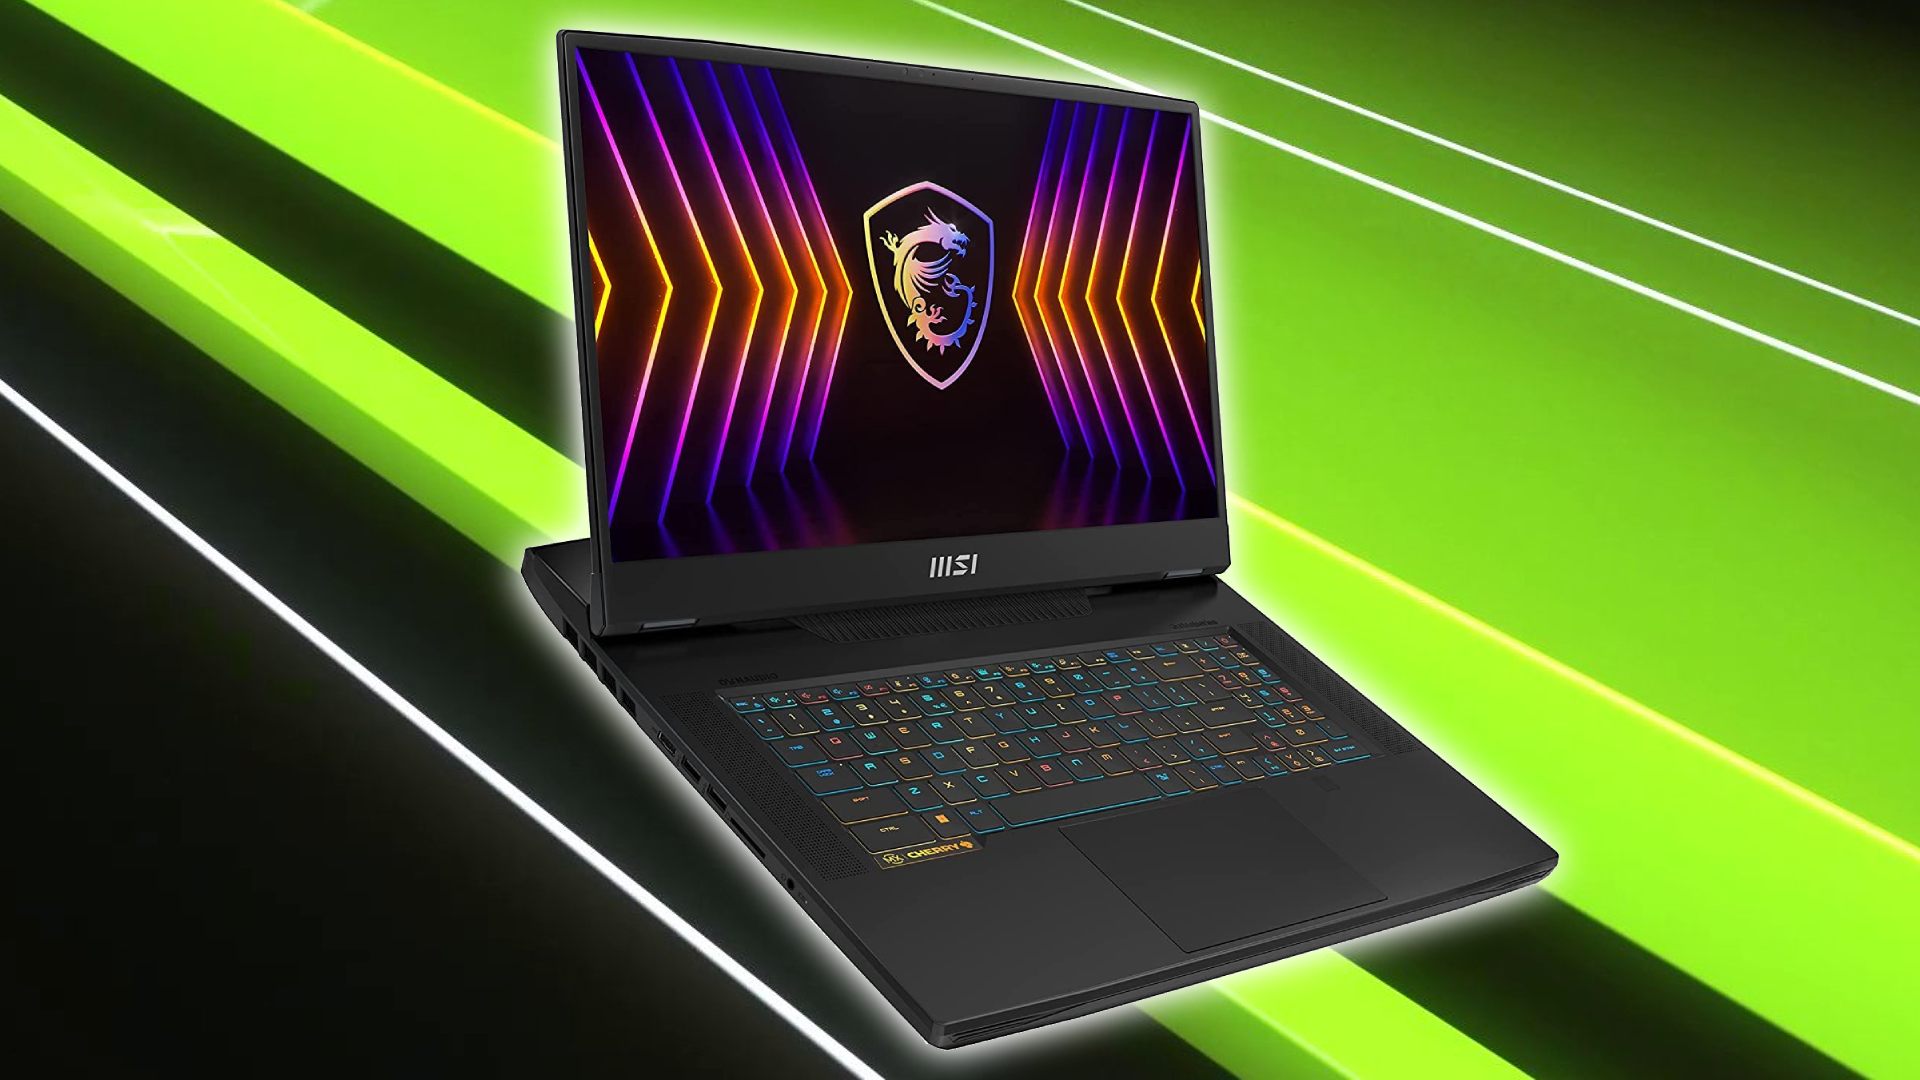 Top MSI RTX 4090 gaming laptop cost $5,000 | PCGamesN